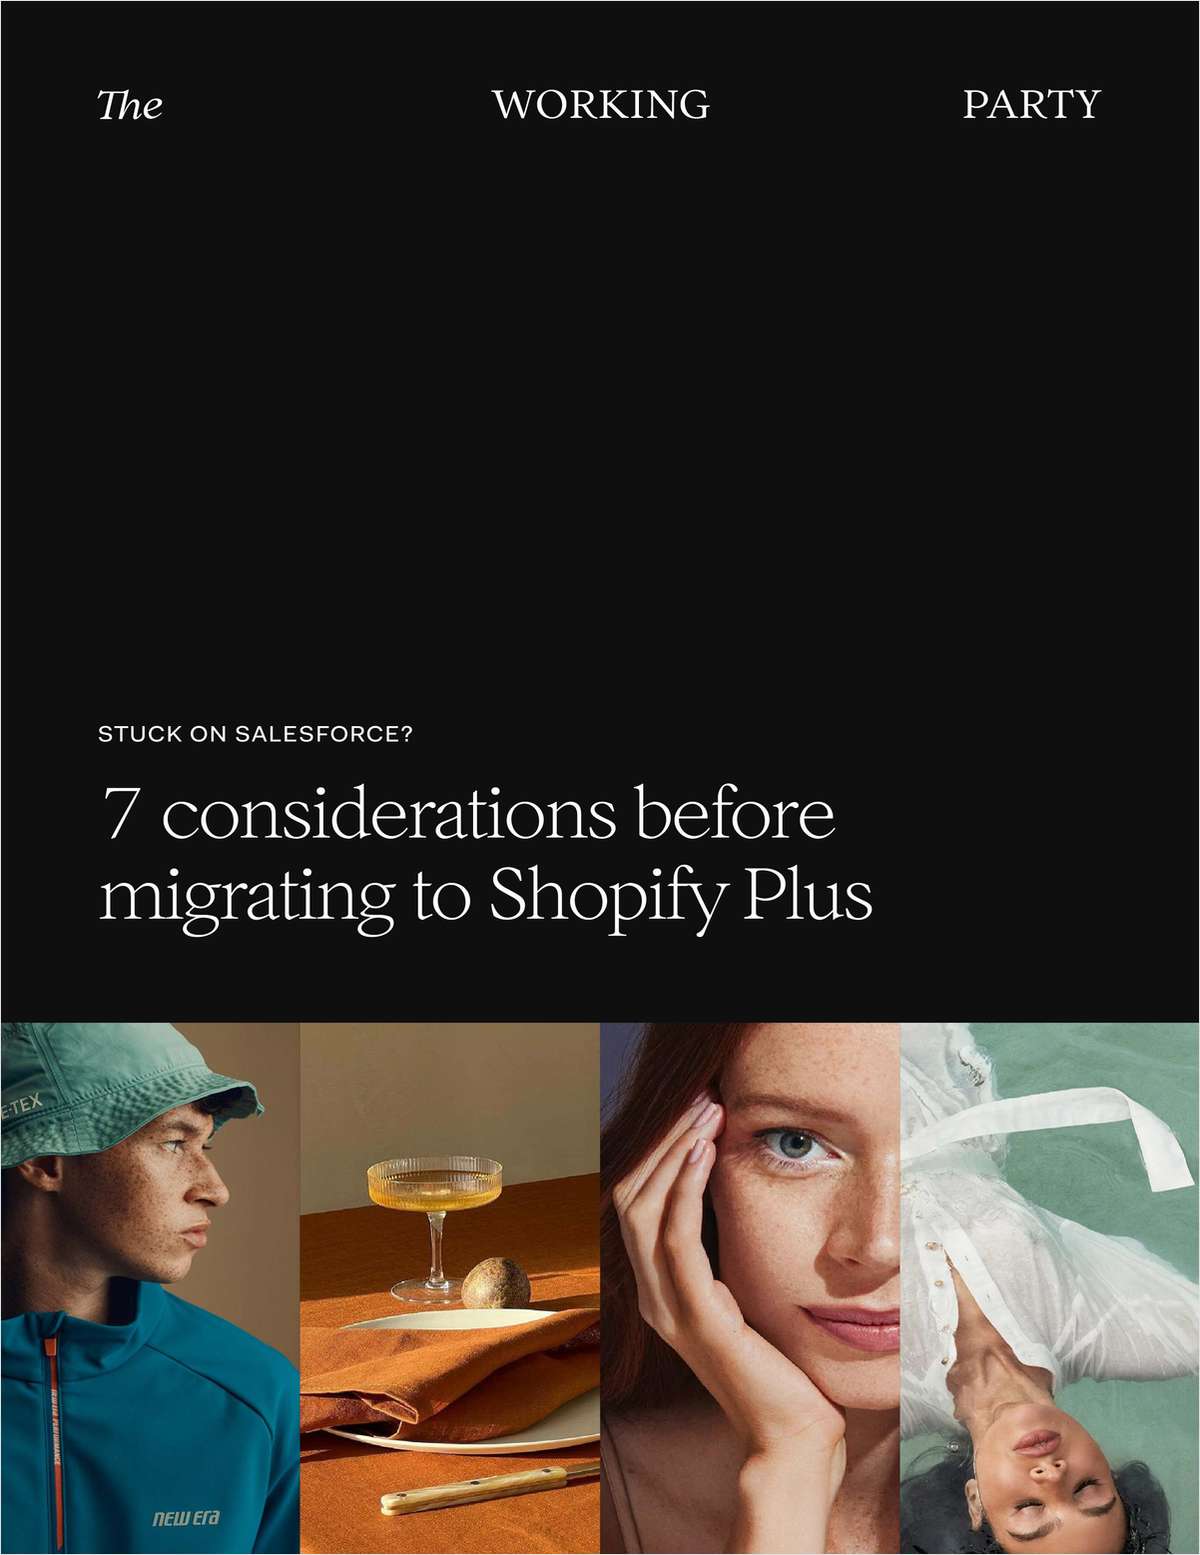 Ready to replatform? 7 considerations before migrating to Shopify Plus from Salesforce Commerce Cloud.